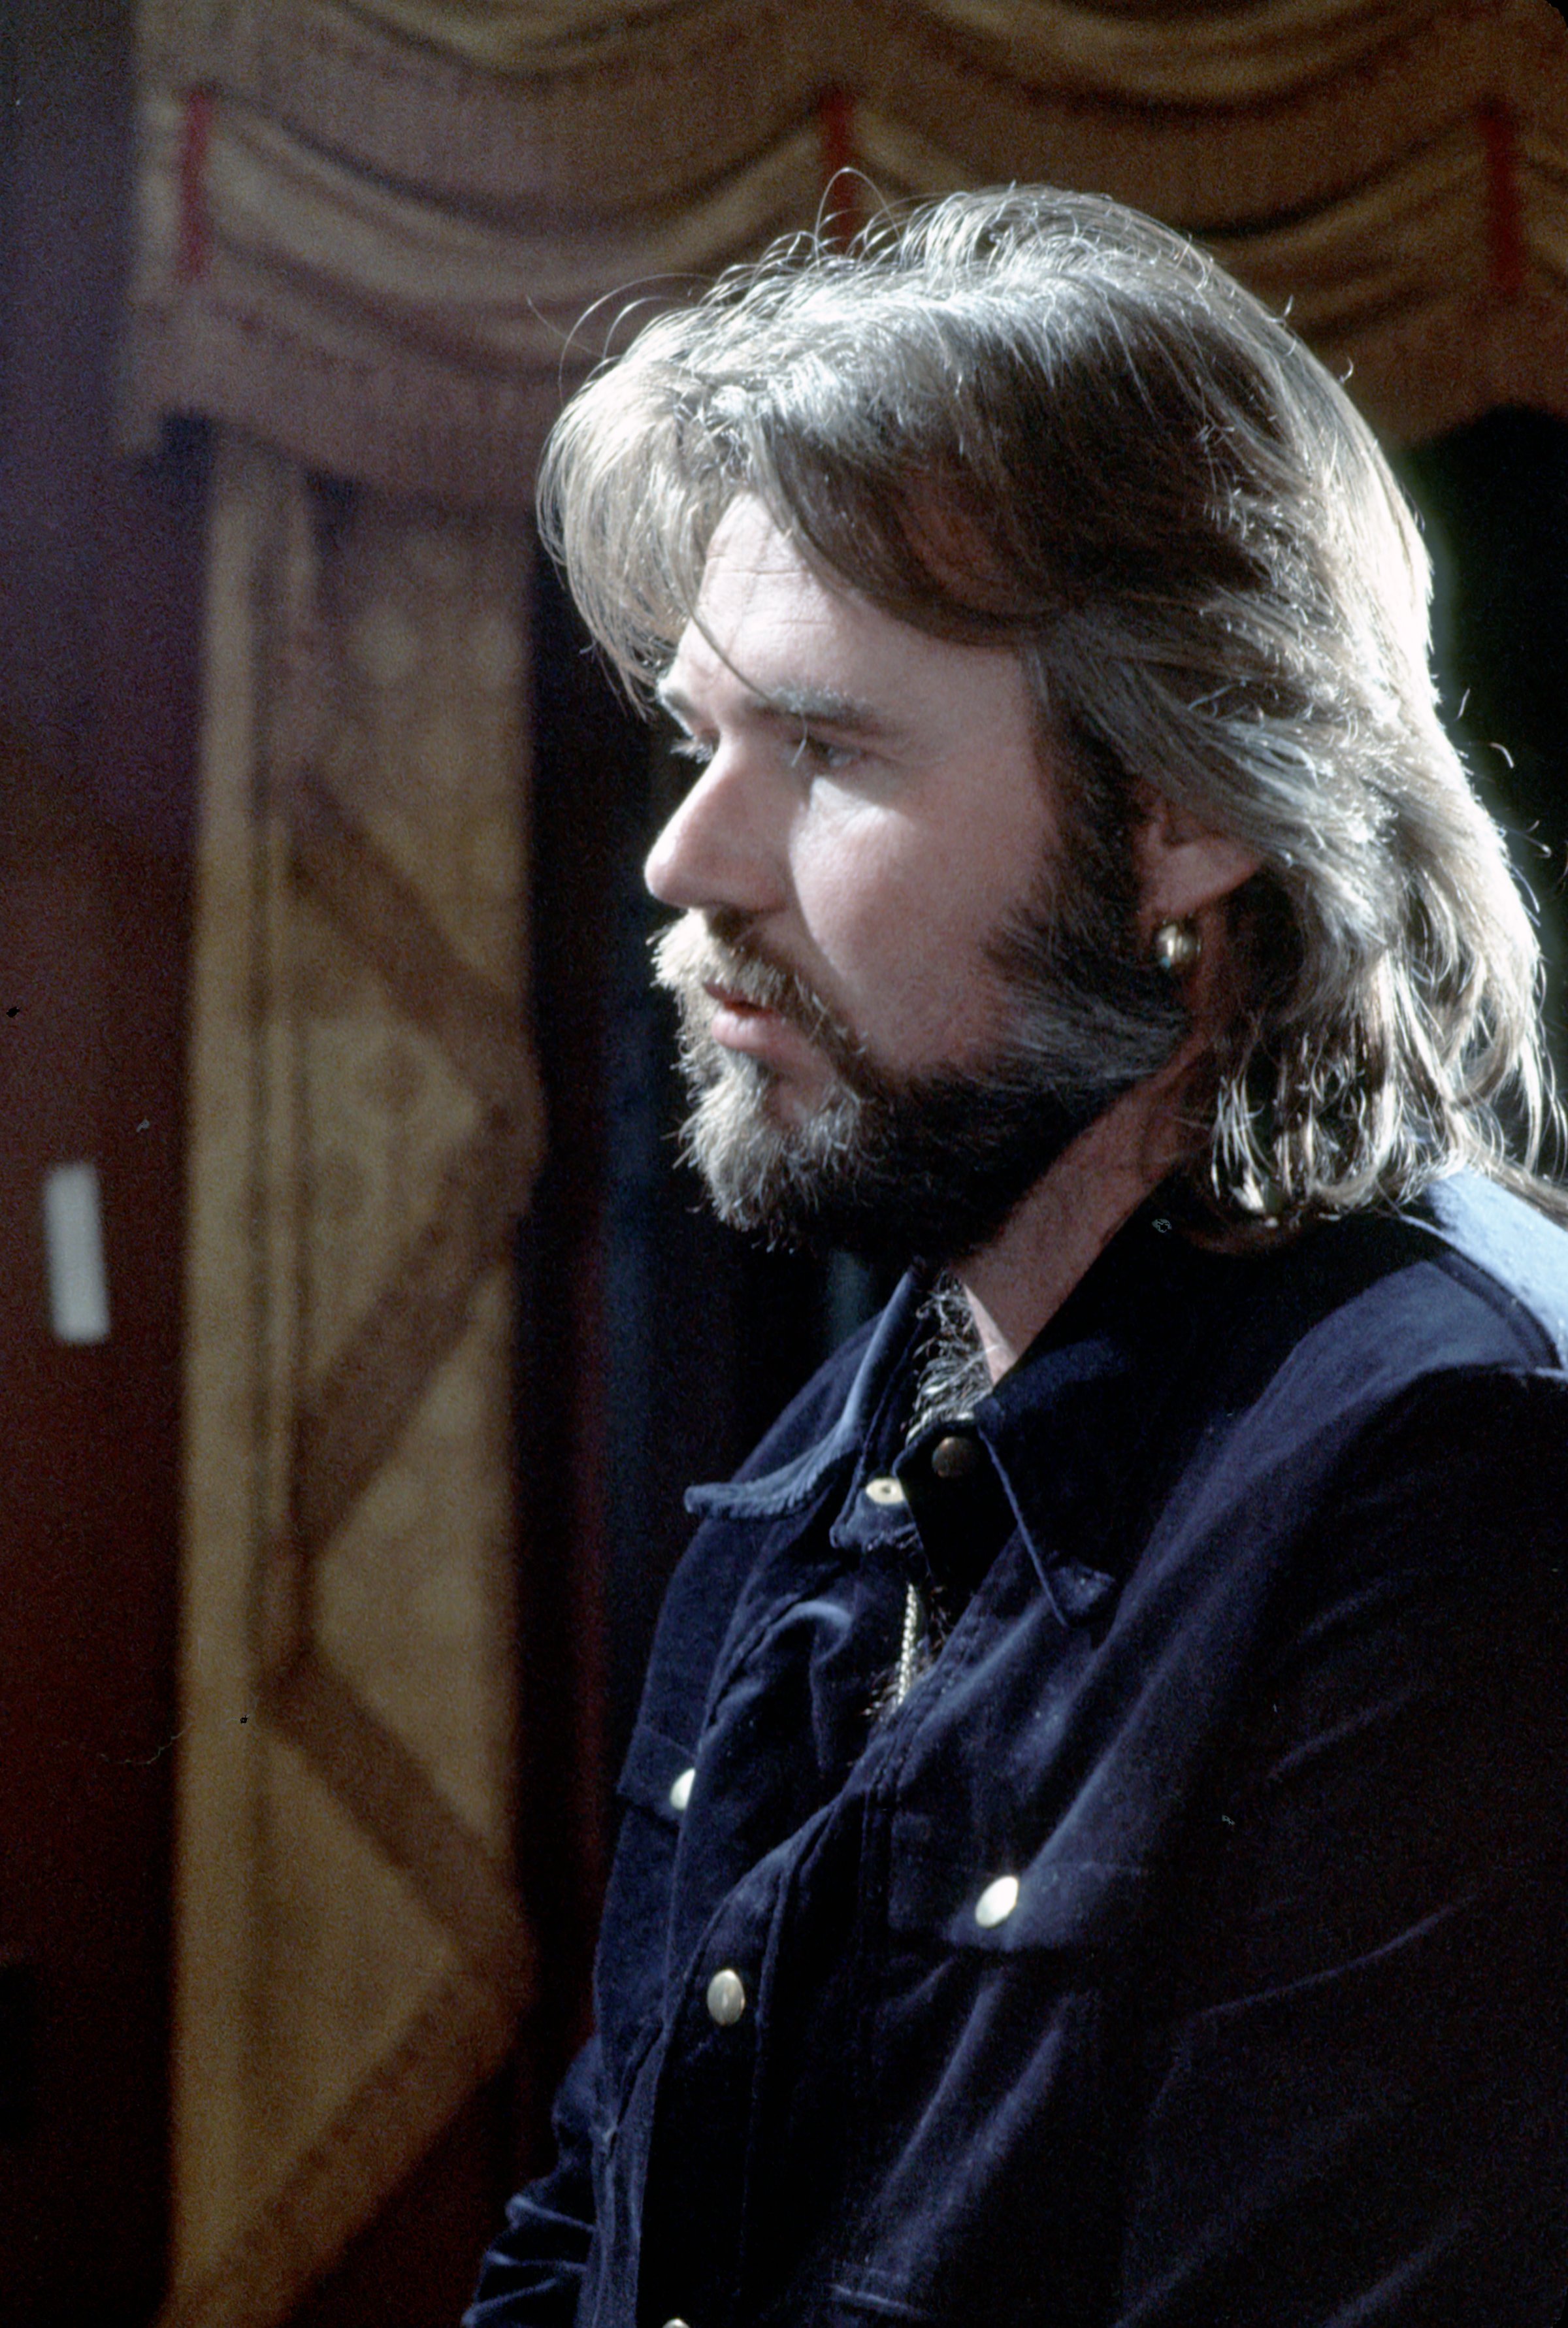 Pictured: Country music Hall of Famer Kenny Rogers. / Source: Getty Images